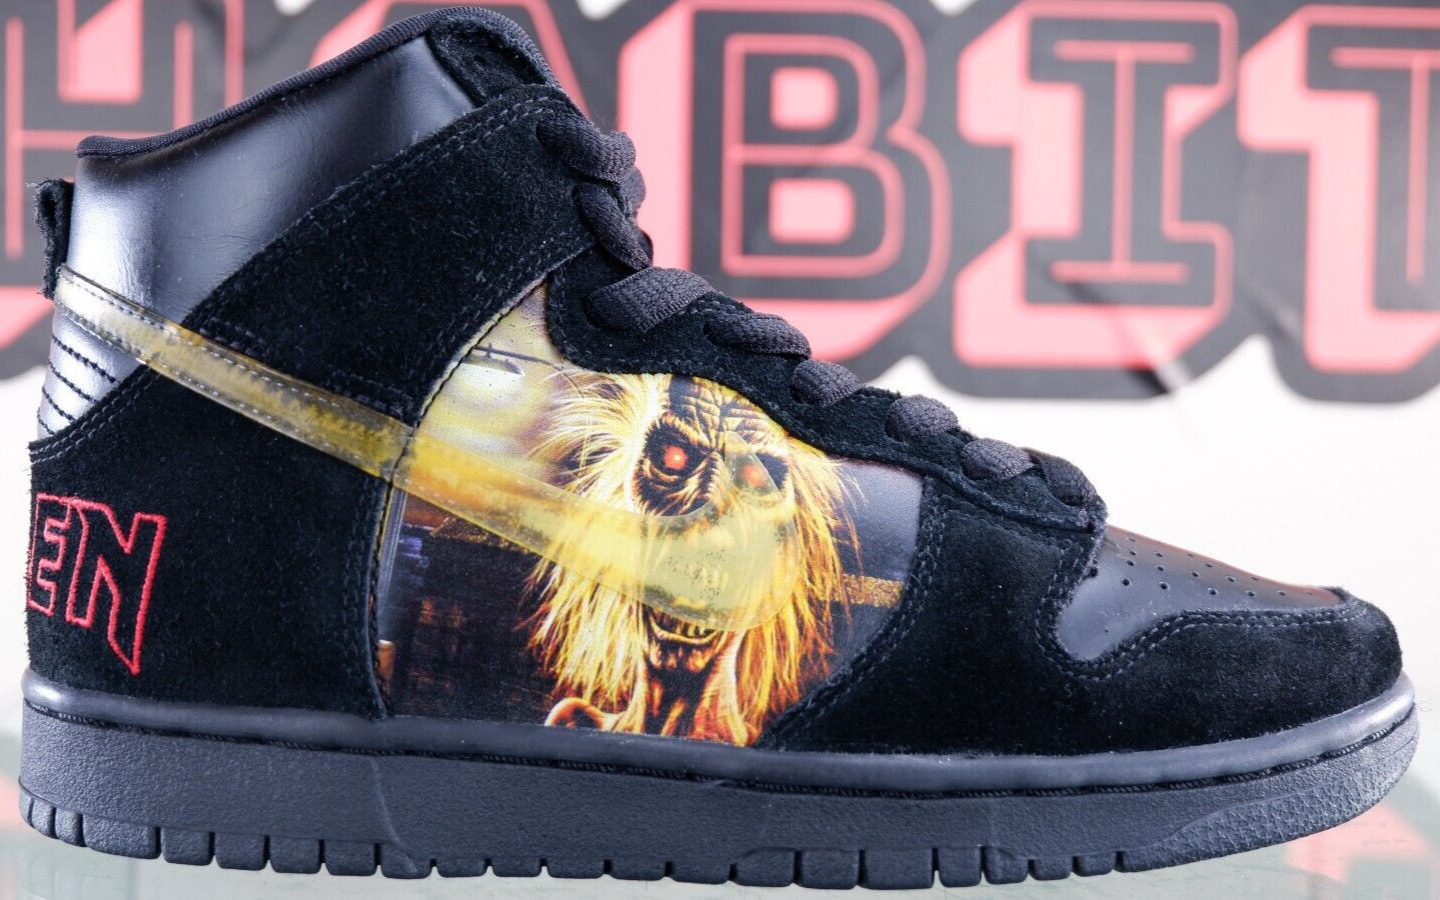 NEW Nike SB Dunk High Iron Maiden Look See Promo SAMPLE Size 6 Black